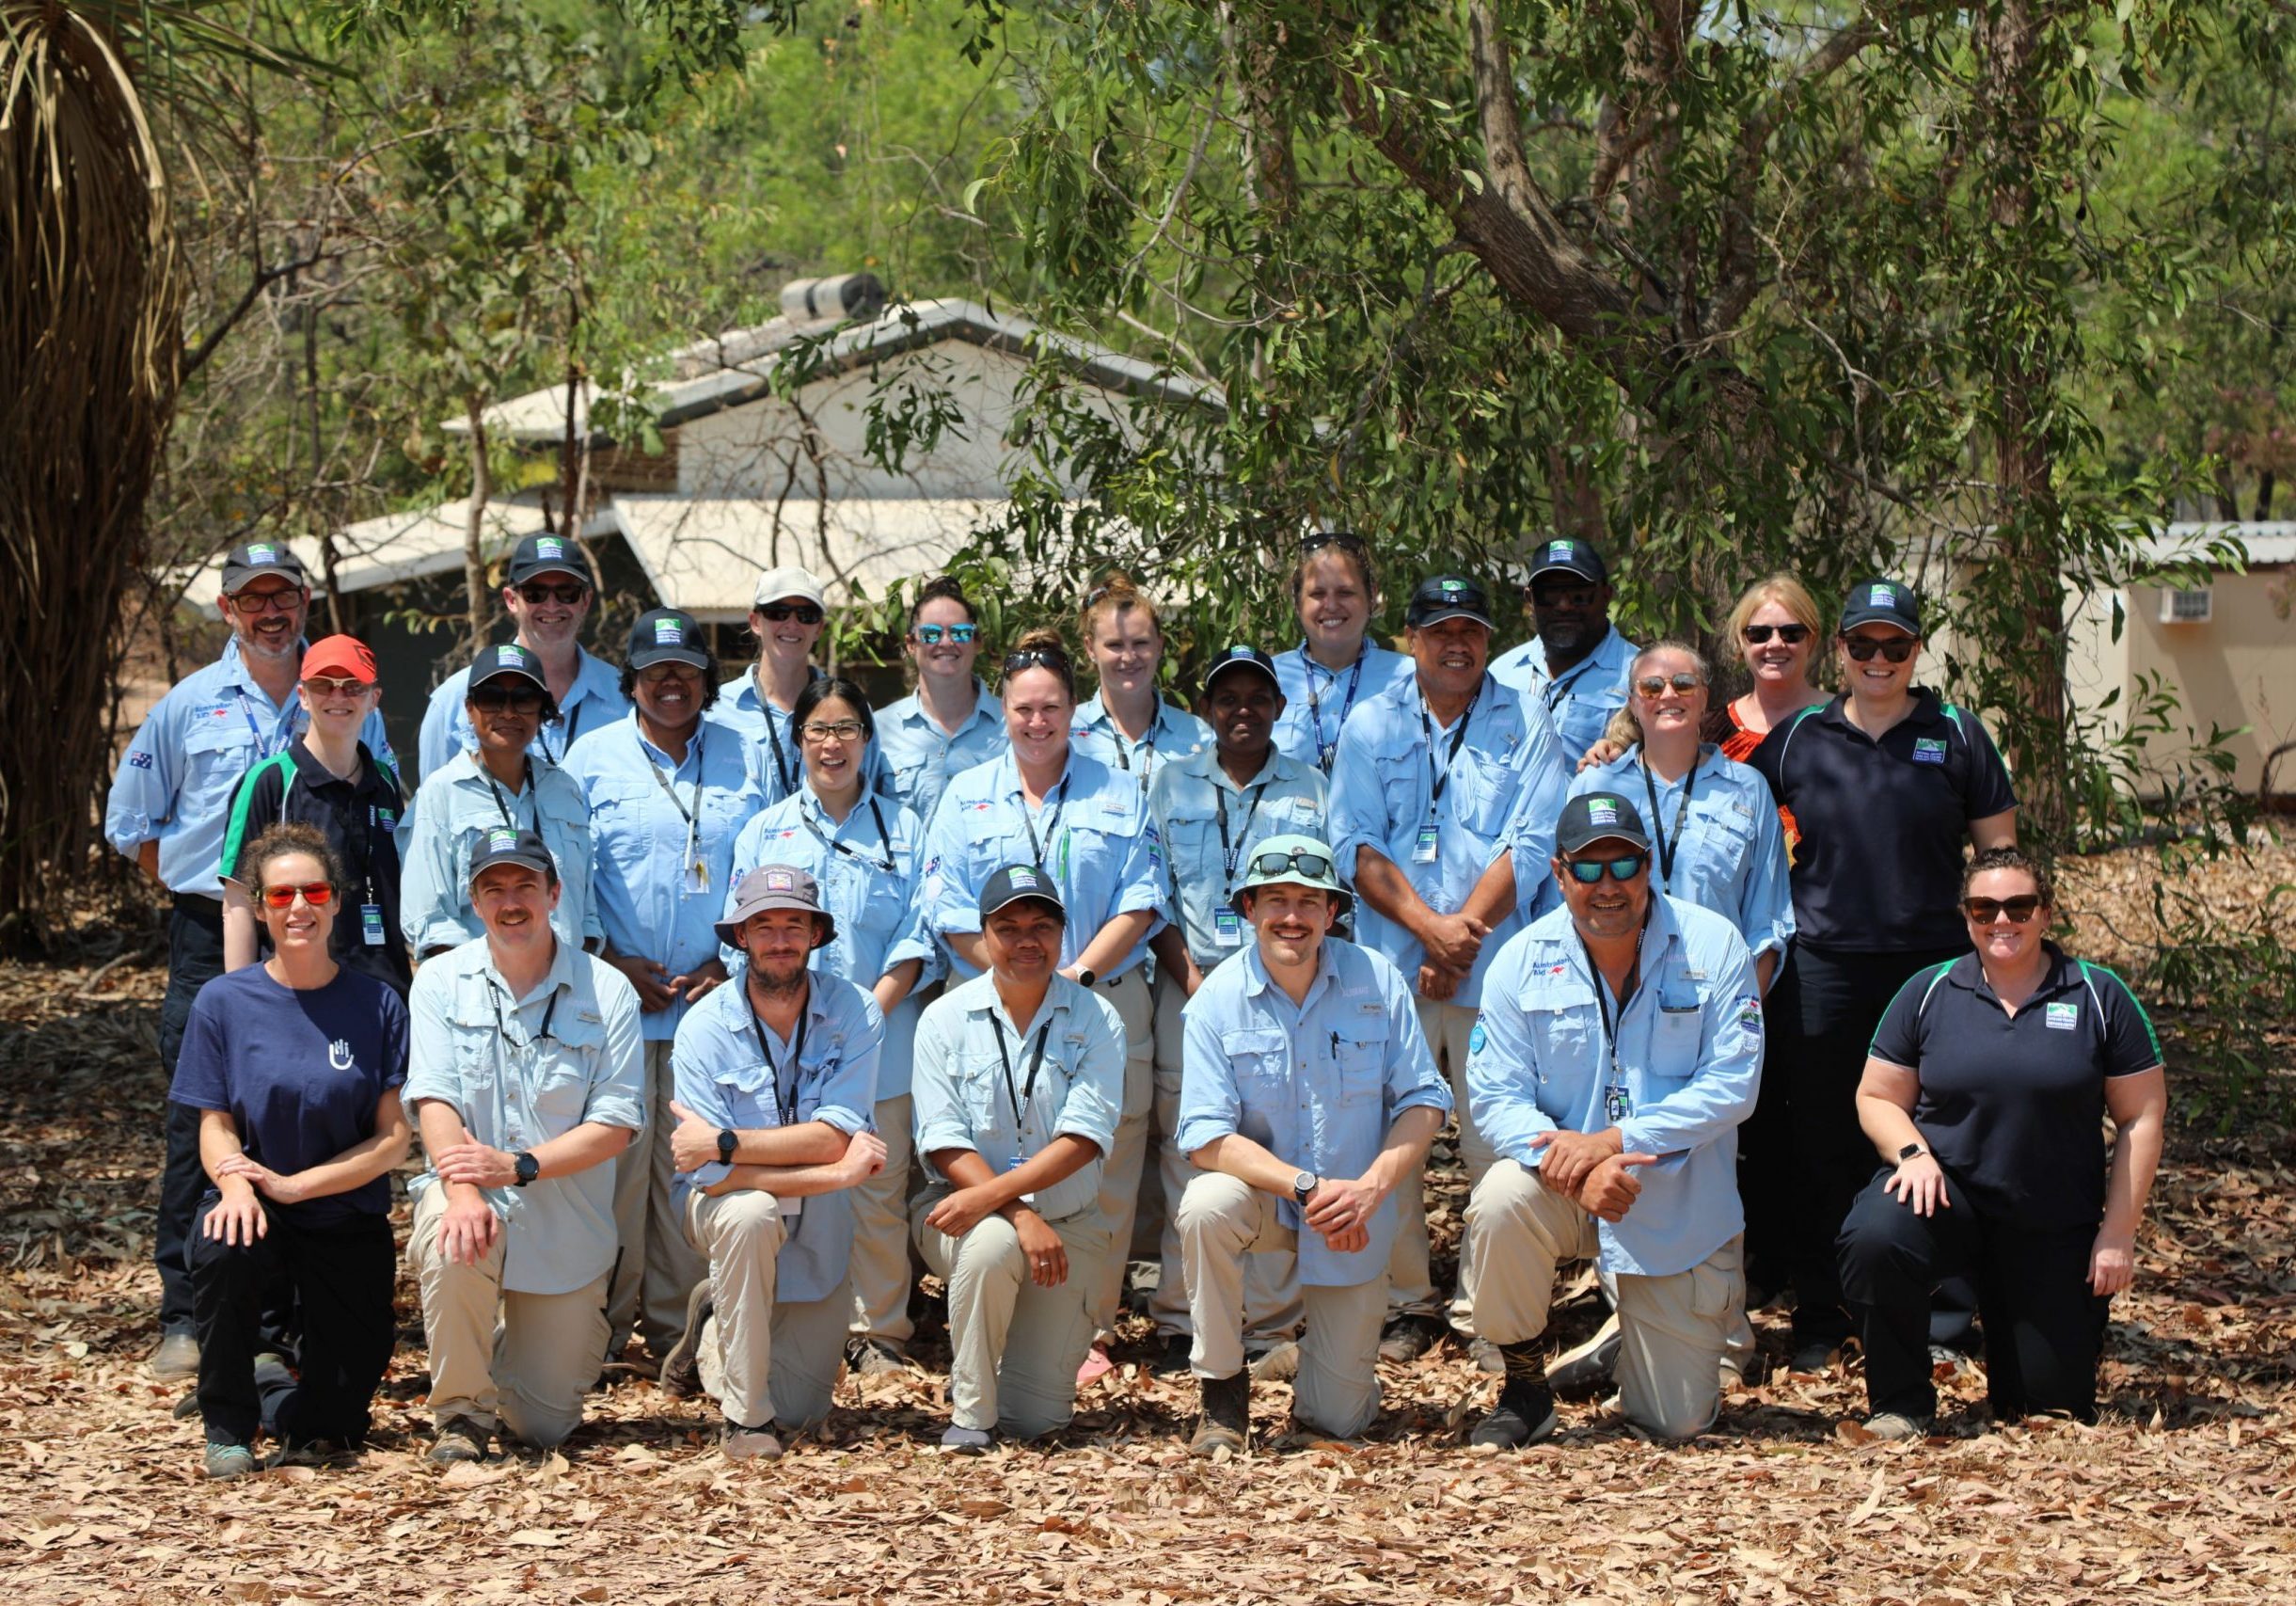 Participants and Faculty from the AUSMAT Rehabilitation Team Member Course standing together and smiling for a team photograph